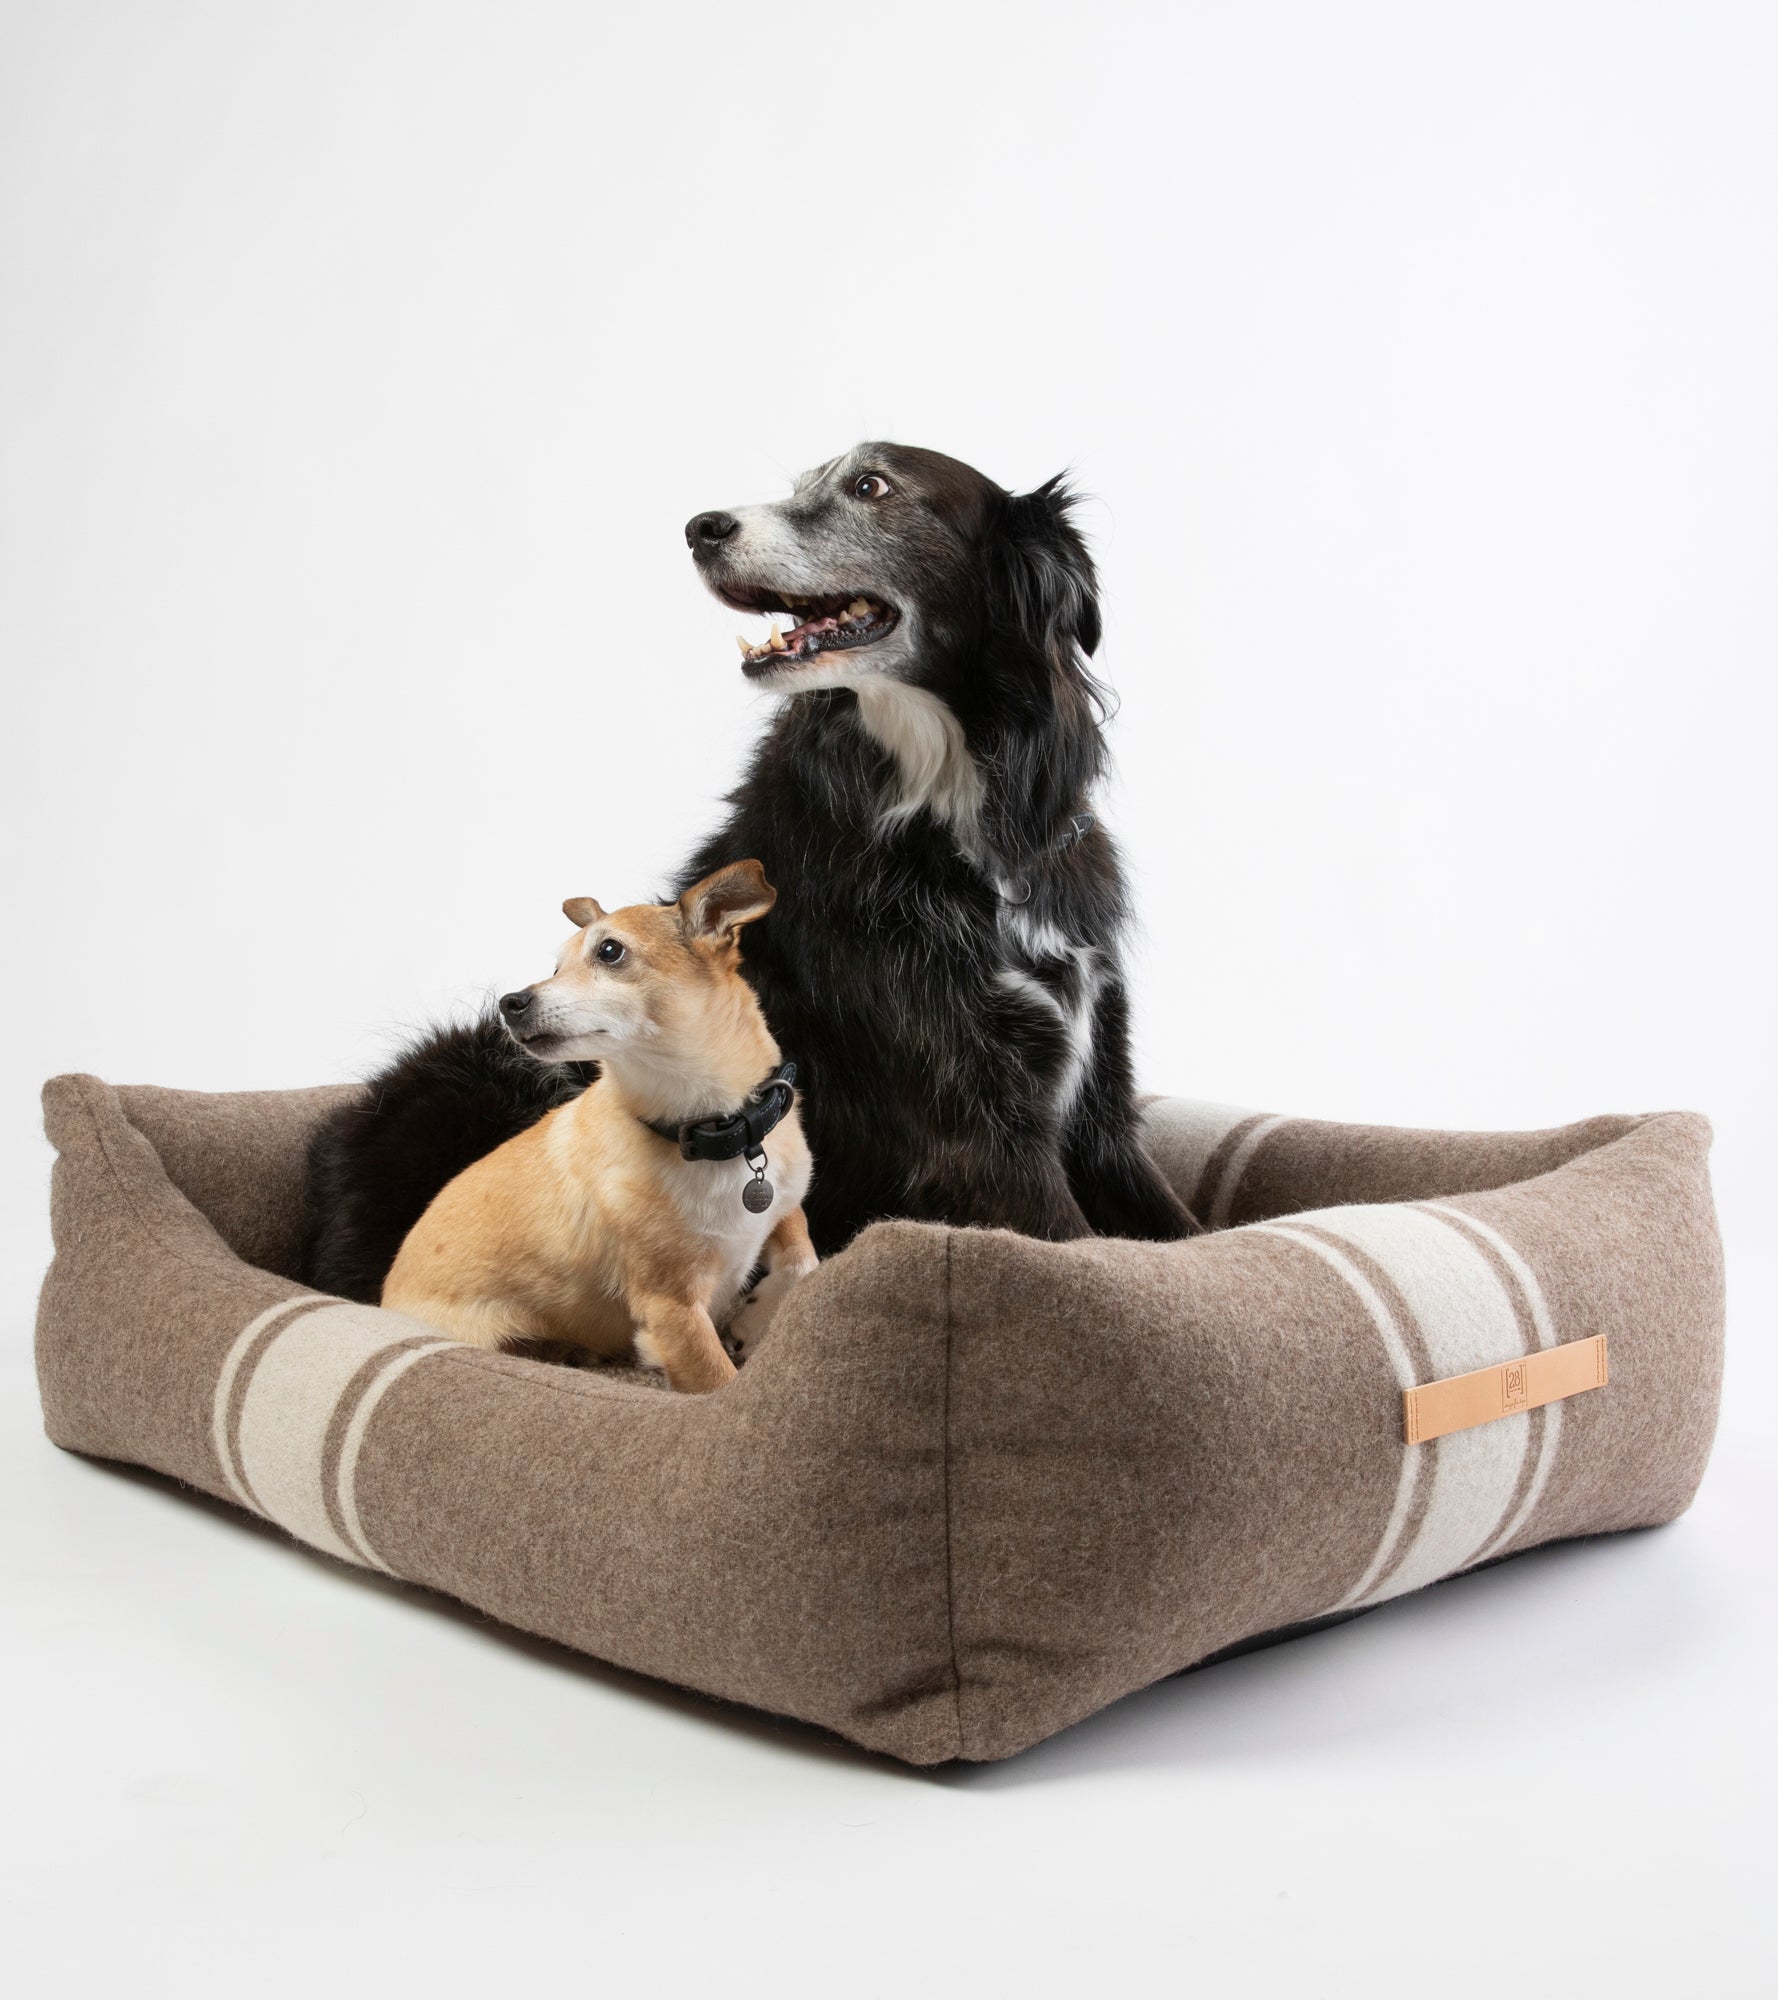 luxury-dog-bed-recycled-wool_03a61a9a-7ccc-4243-9eb6-48ab028fbbb3.jpg